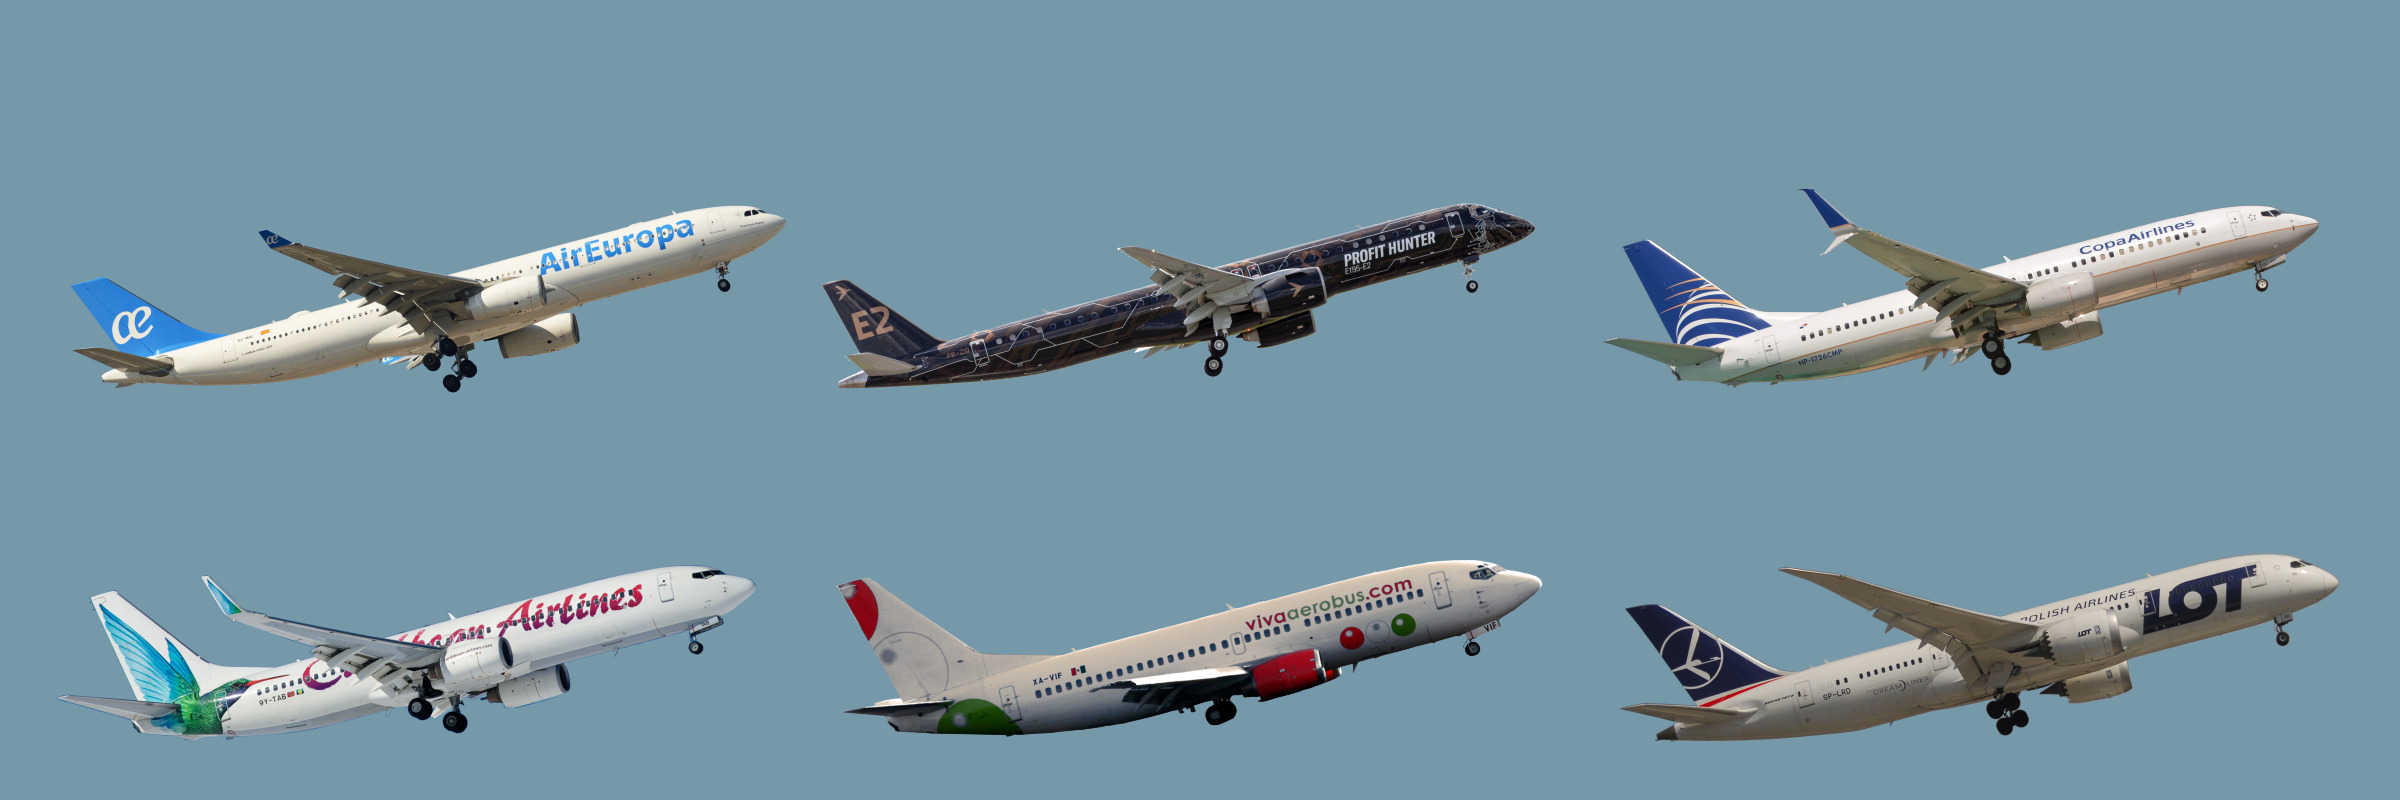 Customers: Air Europa, Caribbean Airlines, LOT Polish Airlines, and VivaAerobus